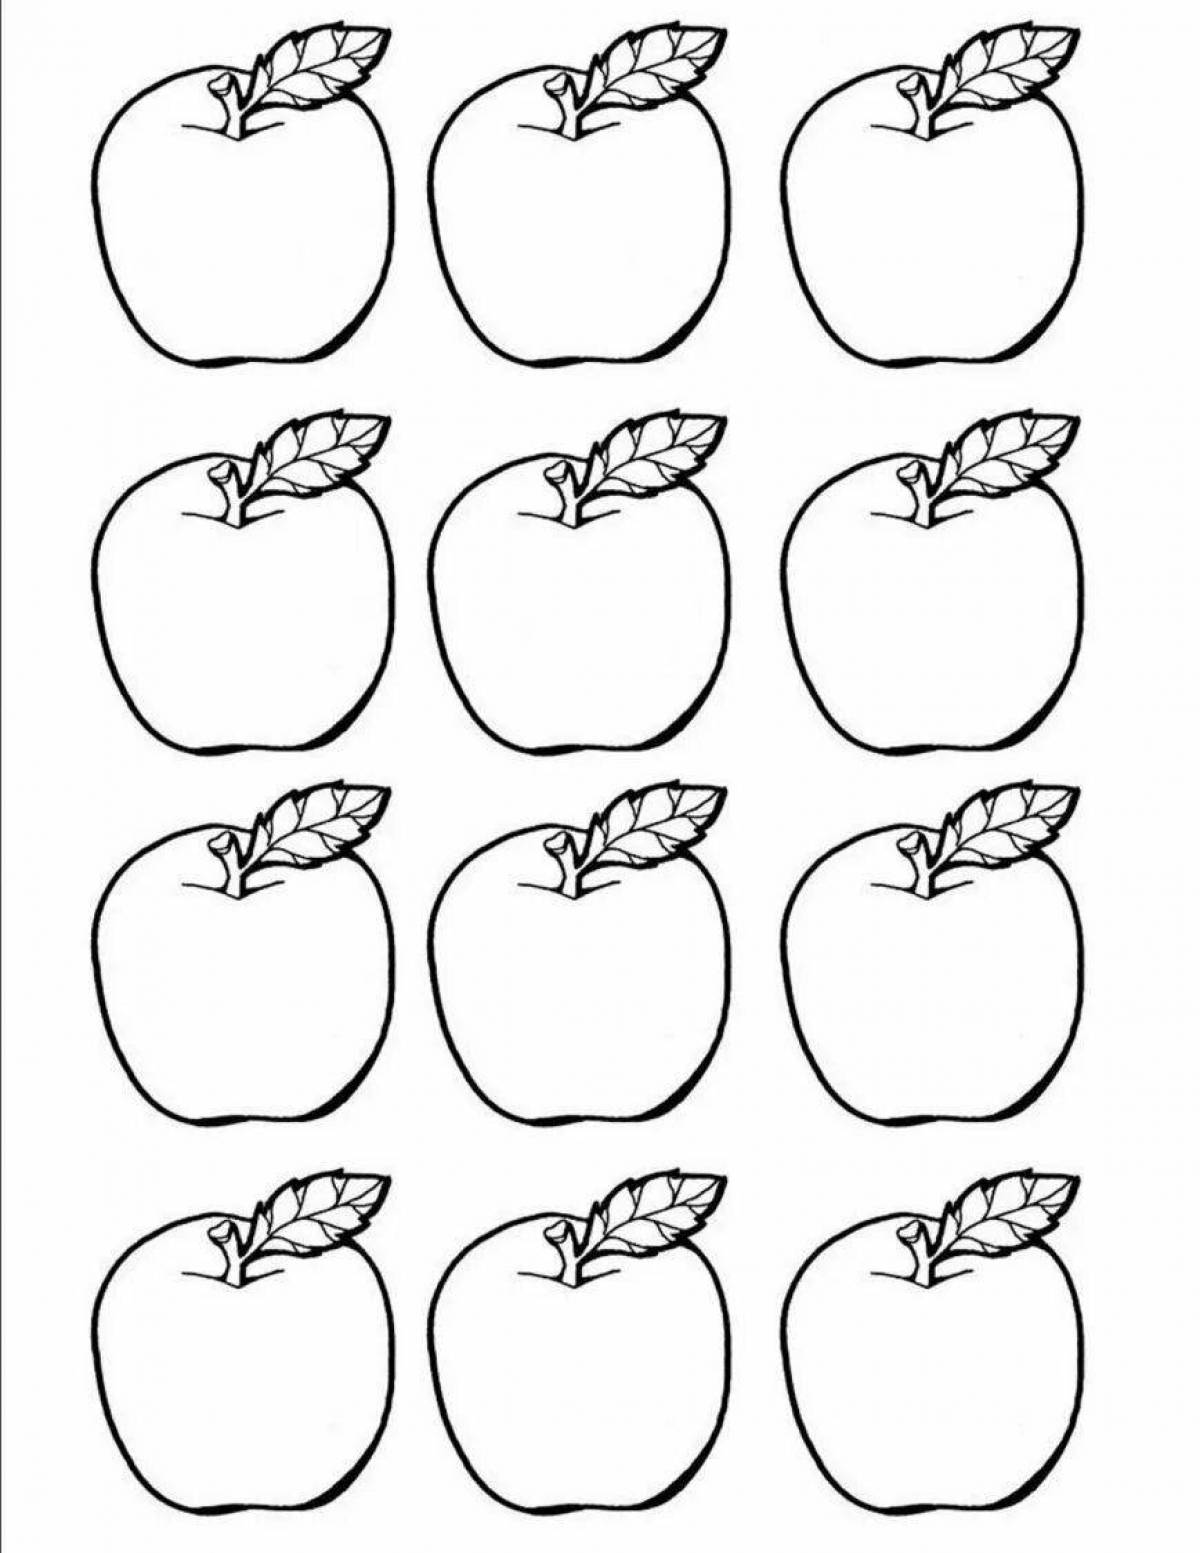 Apple drawing for kids #6